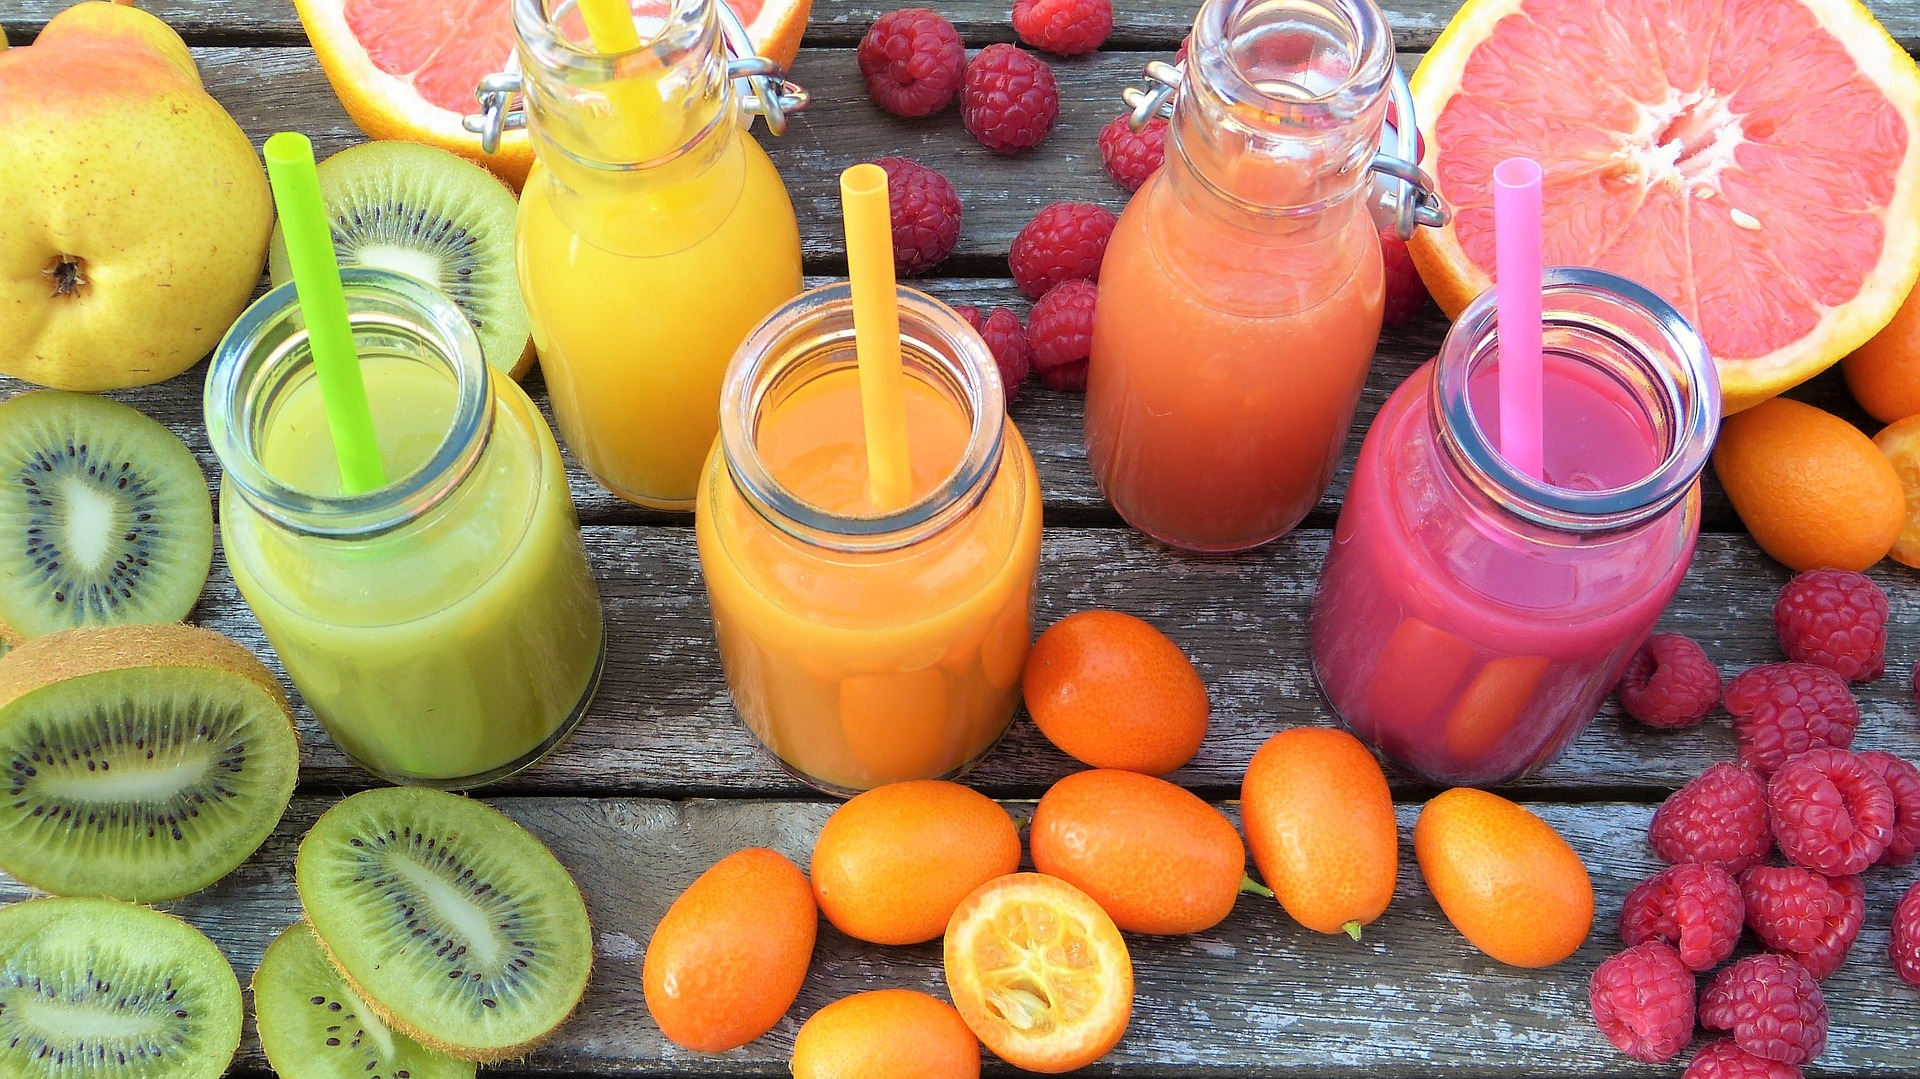 Green, orange and red smoothie made from healthy fruit juices.